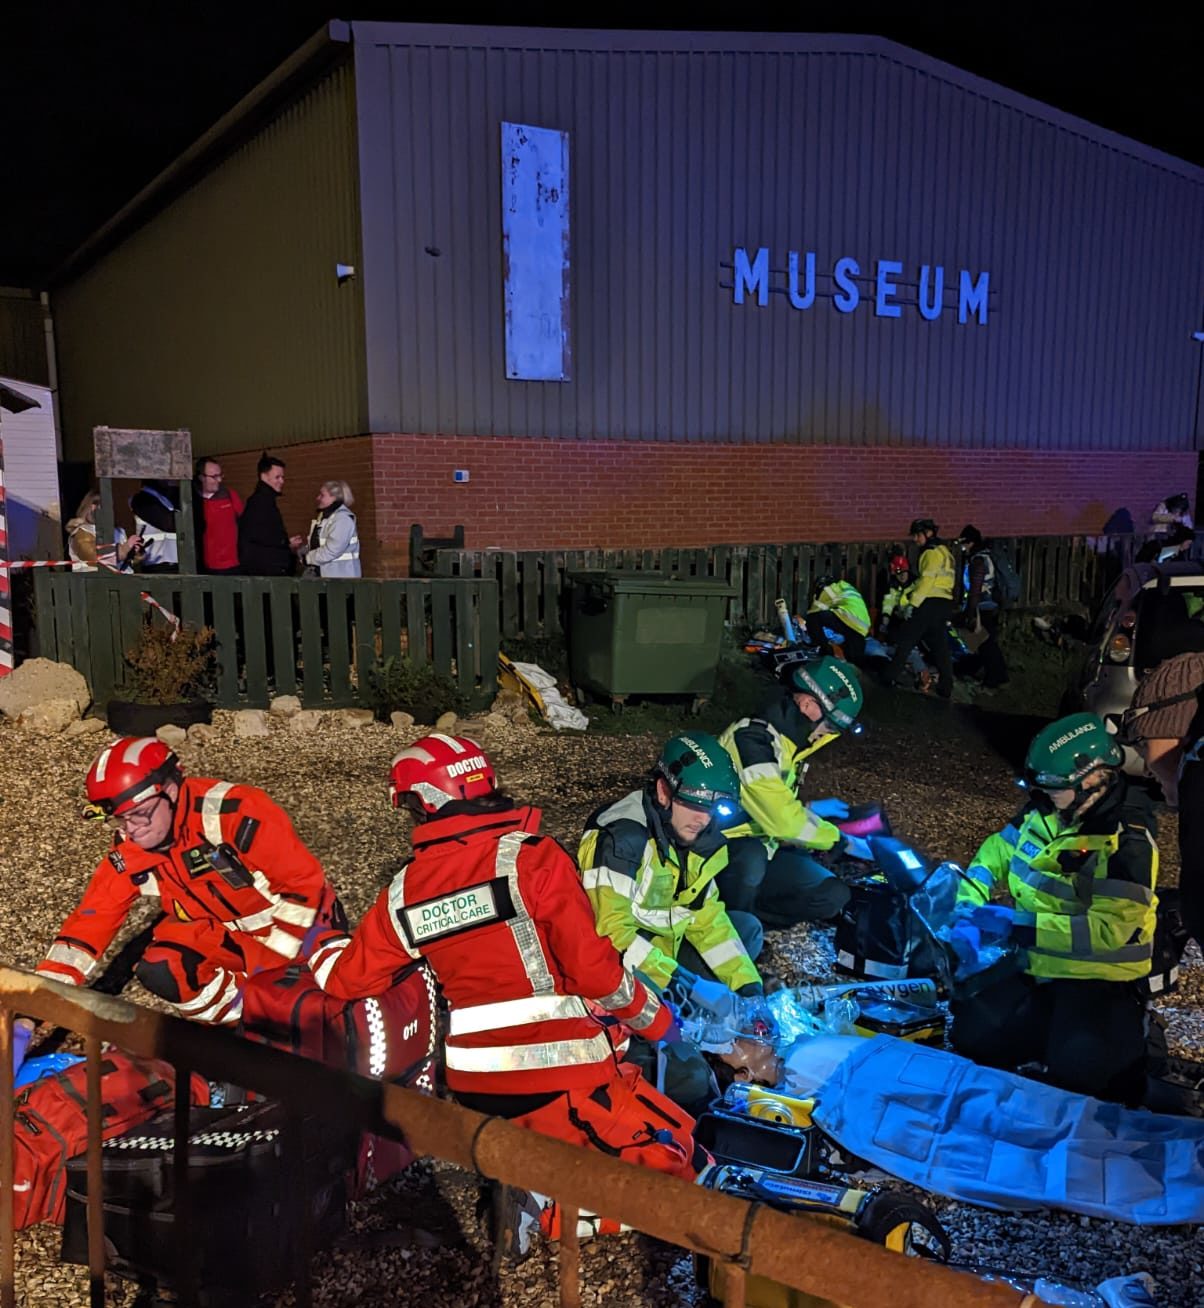 A team of medical professionals involved in a training exercise at night